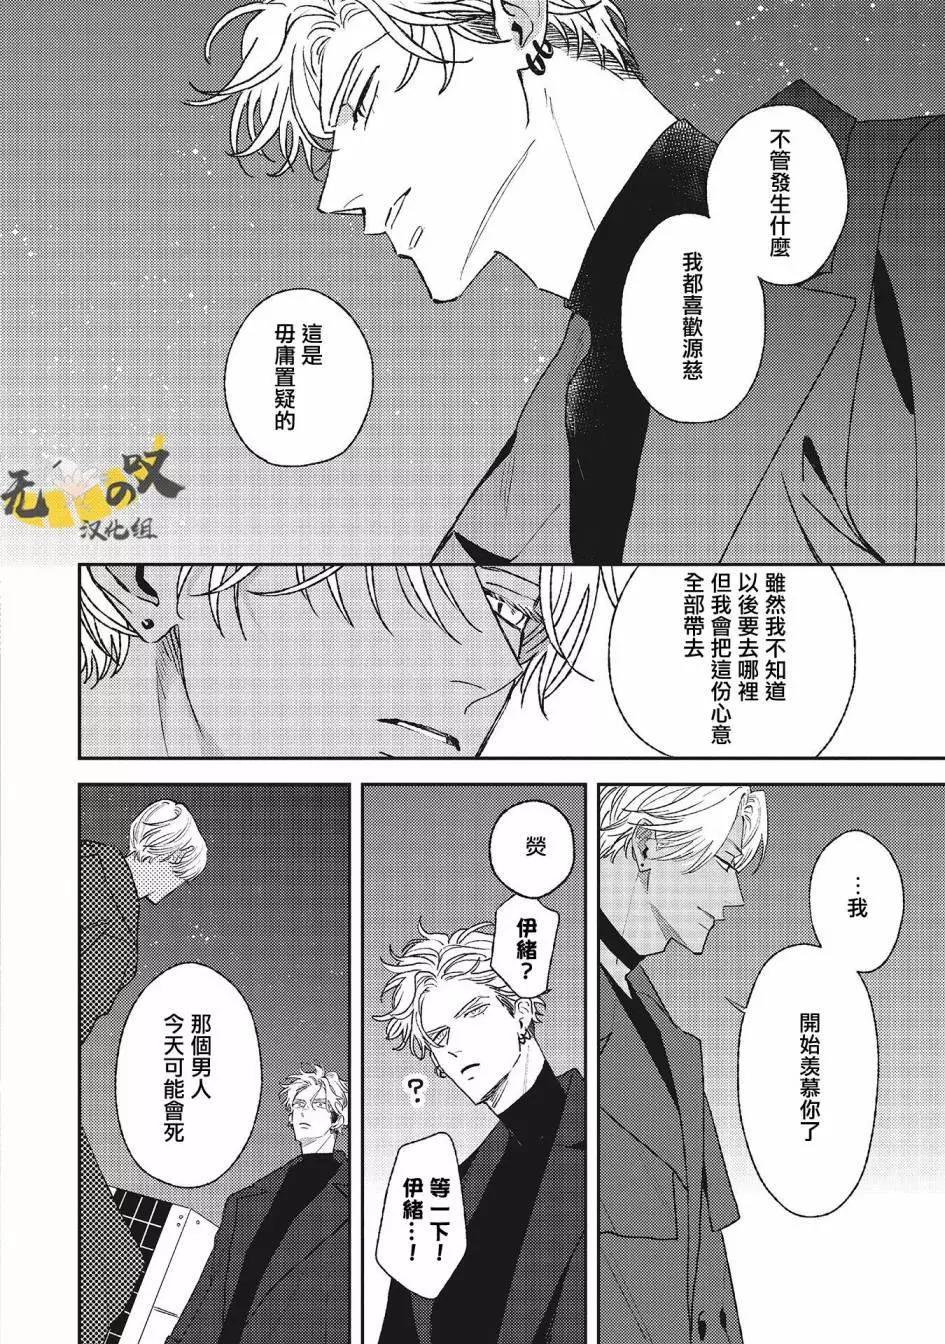 His Little Amber - 第07話 - 2